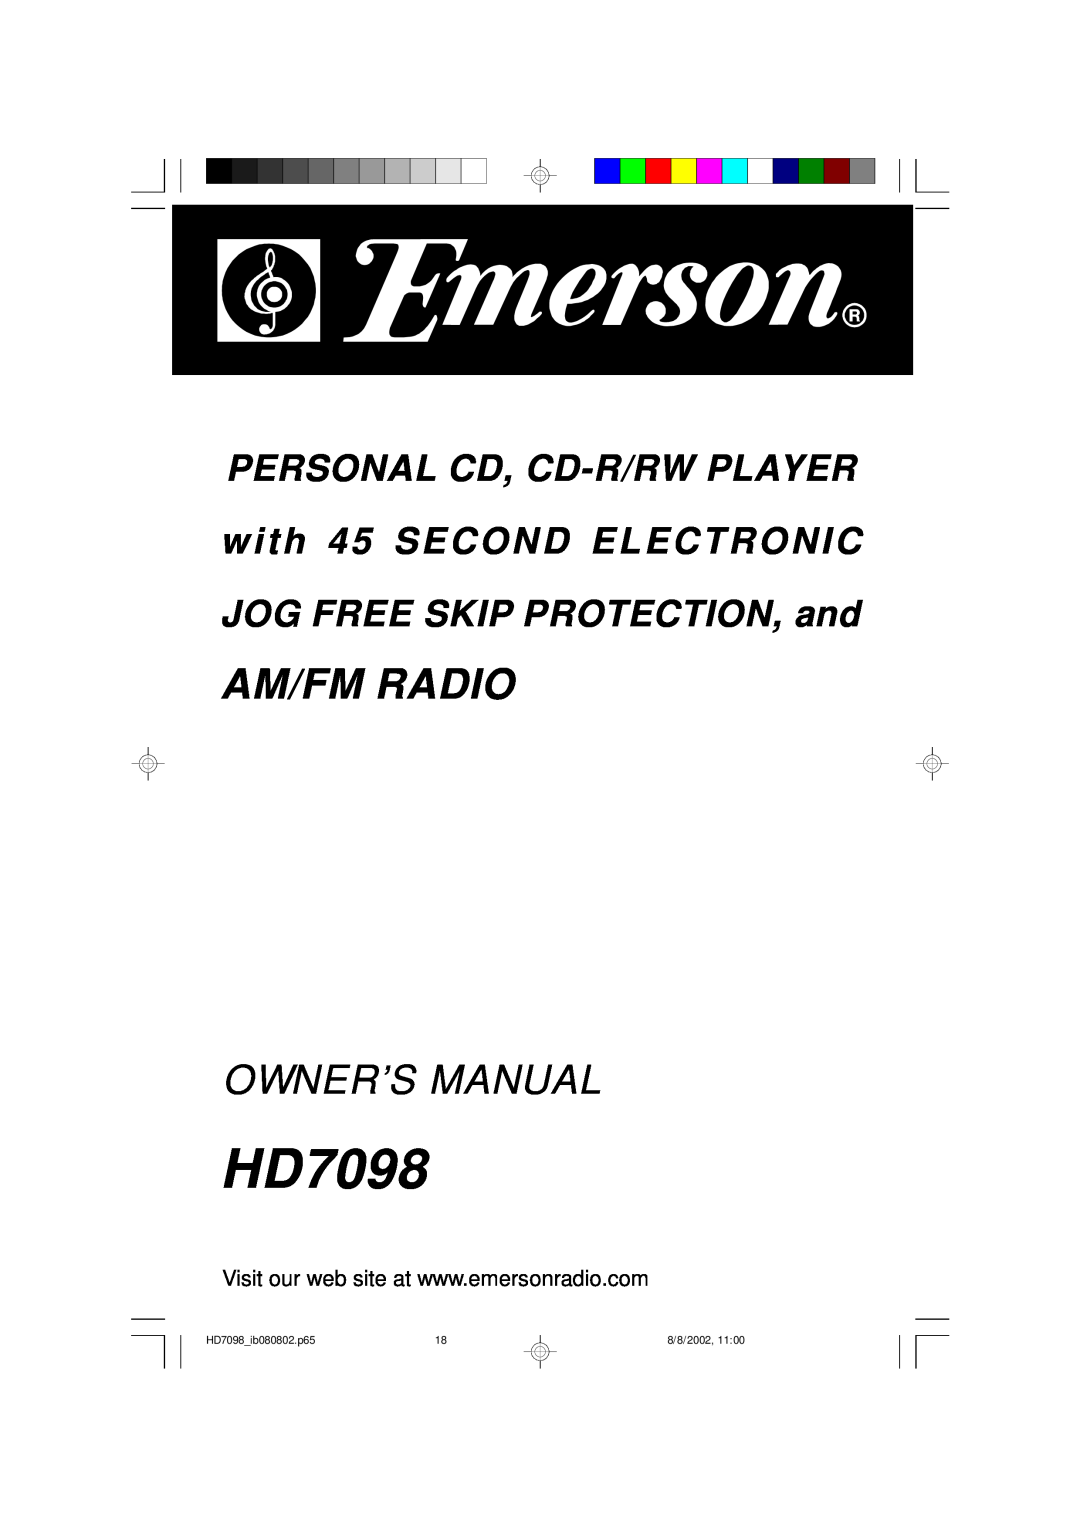 Emerson owner manual Am/Fm Radio, Personal Cd, Cd-R/Rwplayer, with 45 SECOND ELECTRONIC, HD7098 ib080802.p65, 8/8/2002 